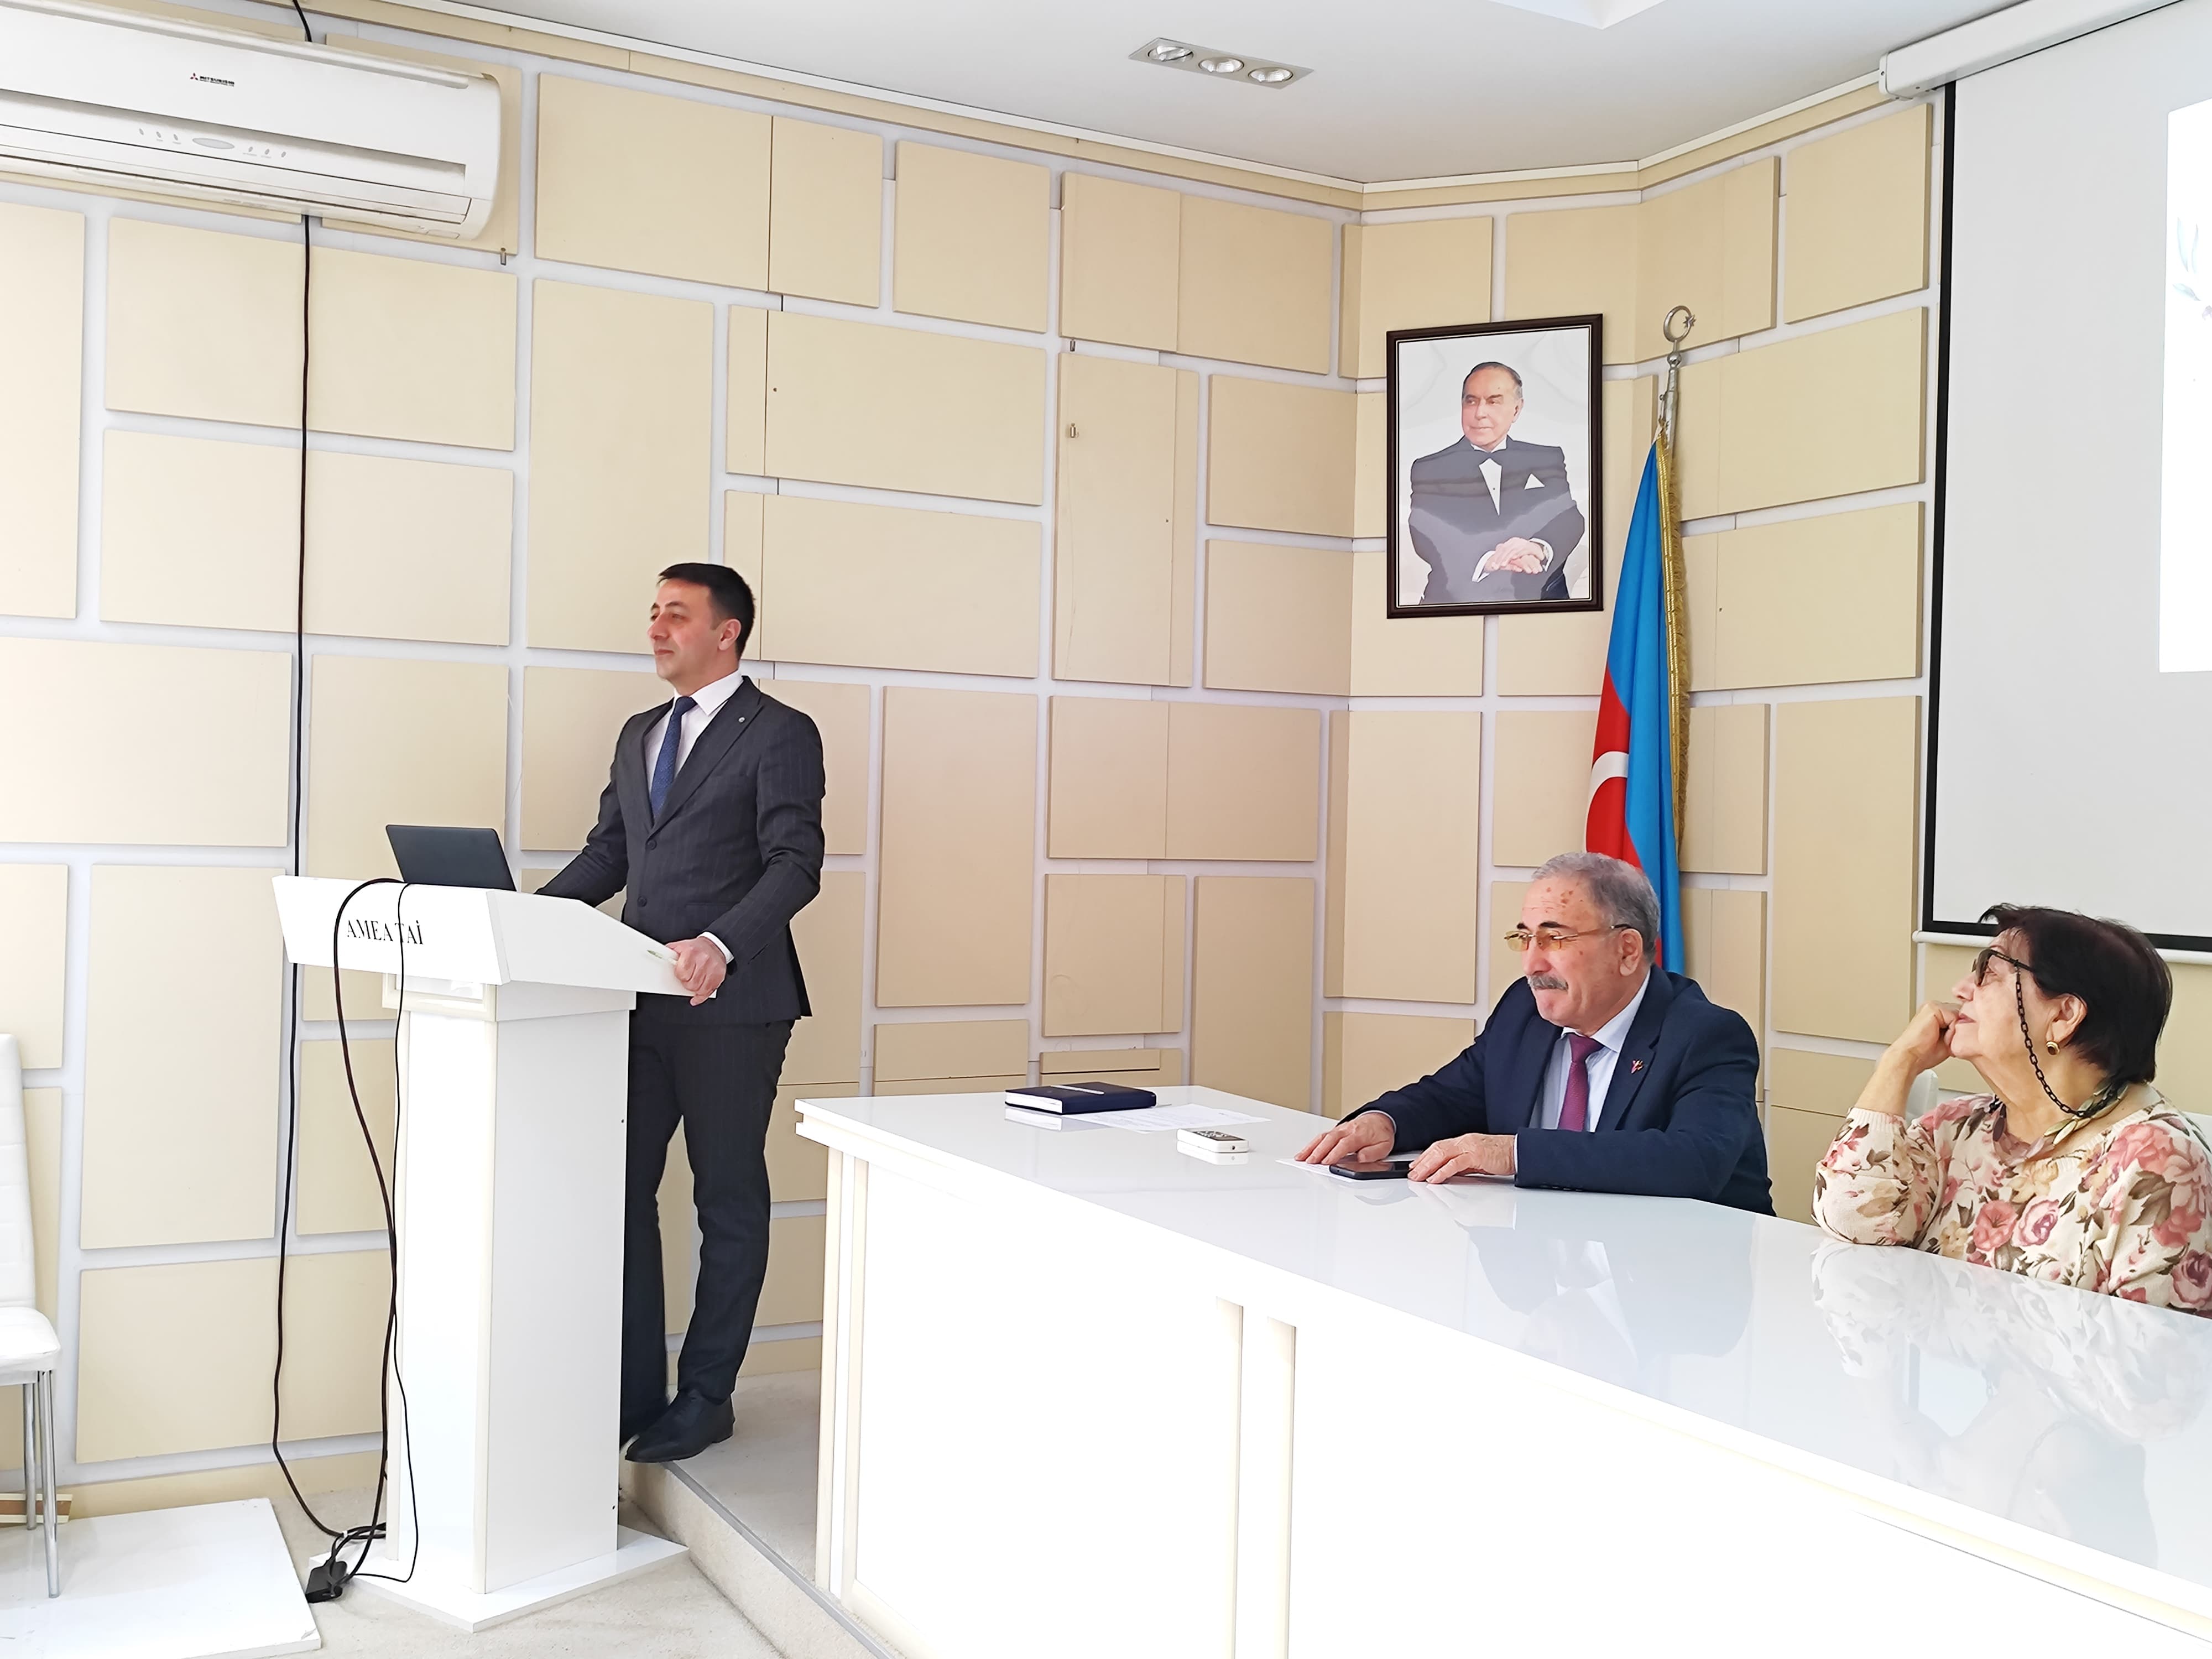 An event was held on the occasion of March 8 - International Women's Day at the Institute of Soil Science and Agrochemistry of the Ministry of Science and Education of the Republic of Azerbaijan.